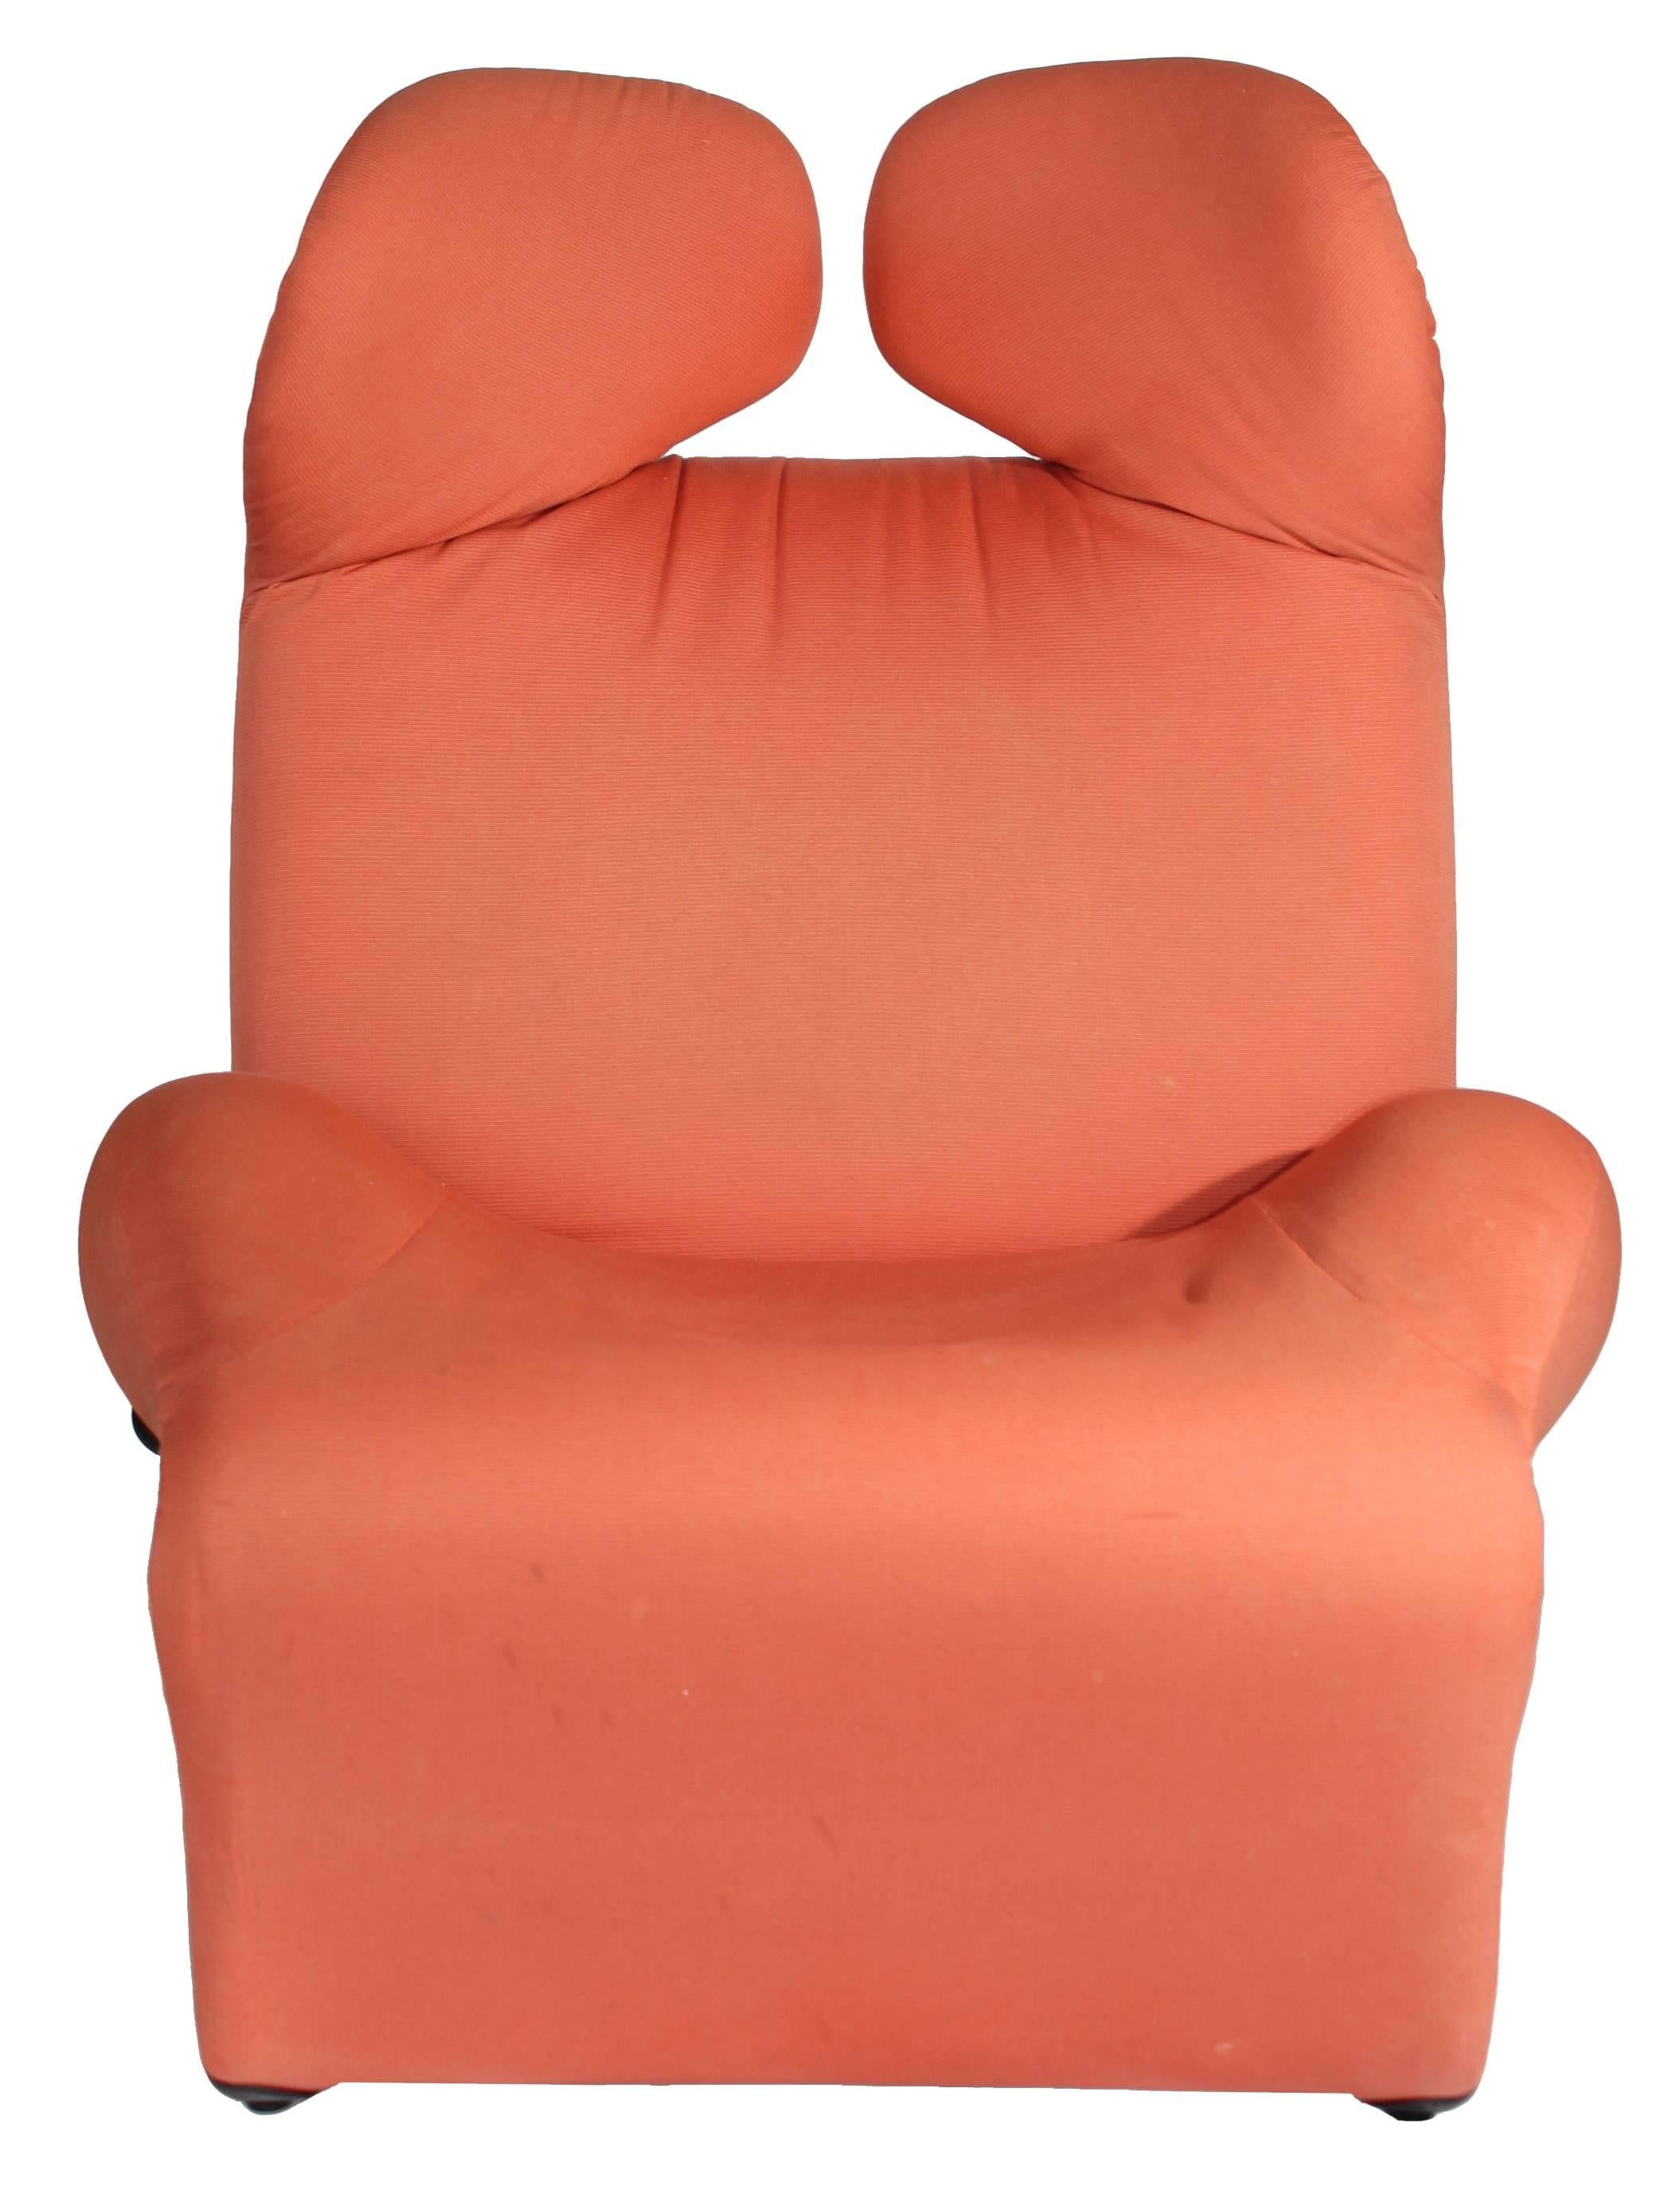 Late 20th Century 1980s Toshiyuki Kita 'Wink' Convertible Fabric Lounge Chair by Cassina, Italy